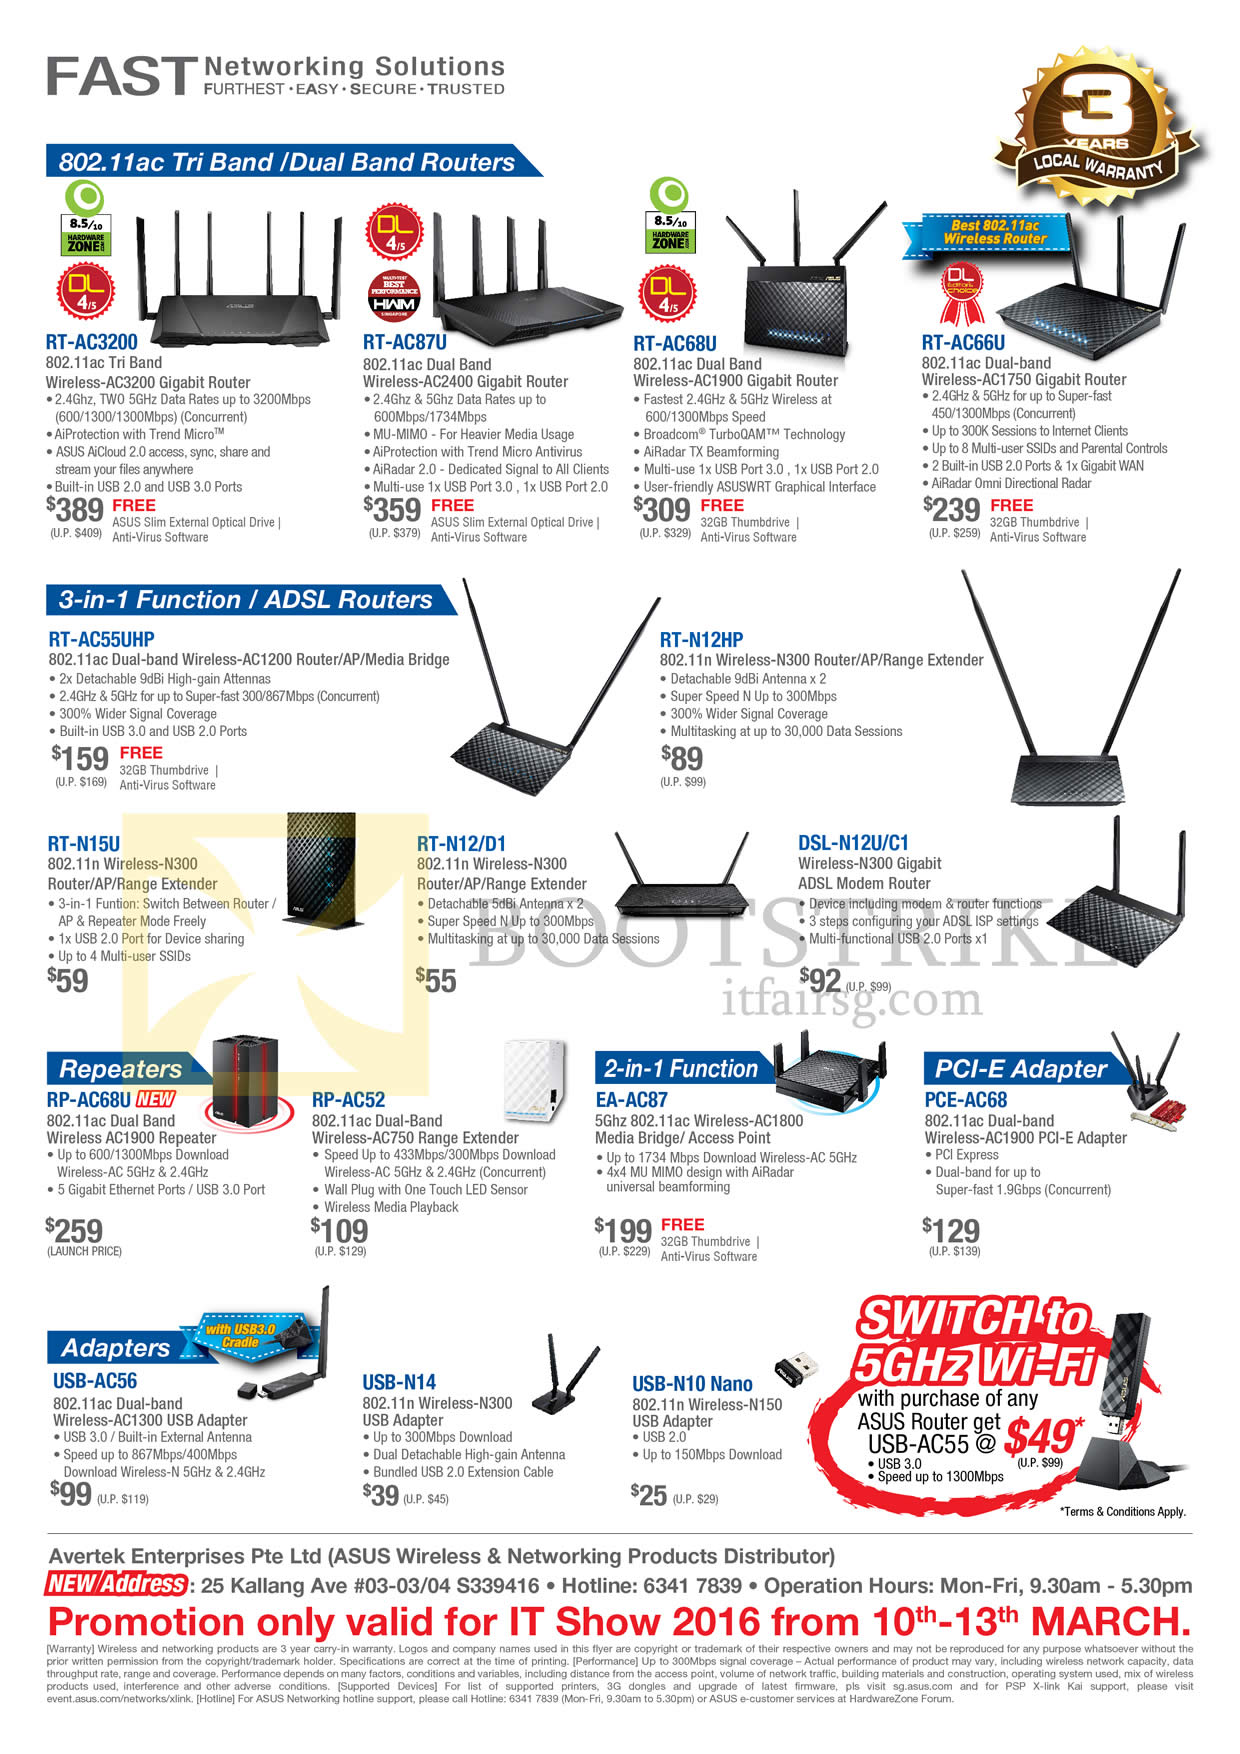 IT SHOW 2016 price list image brochure of ASUS Networking Wireless Routers, ADSL, Repeaters, PCI-E Adapter, USB